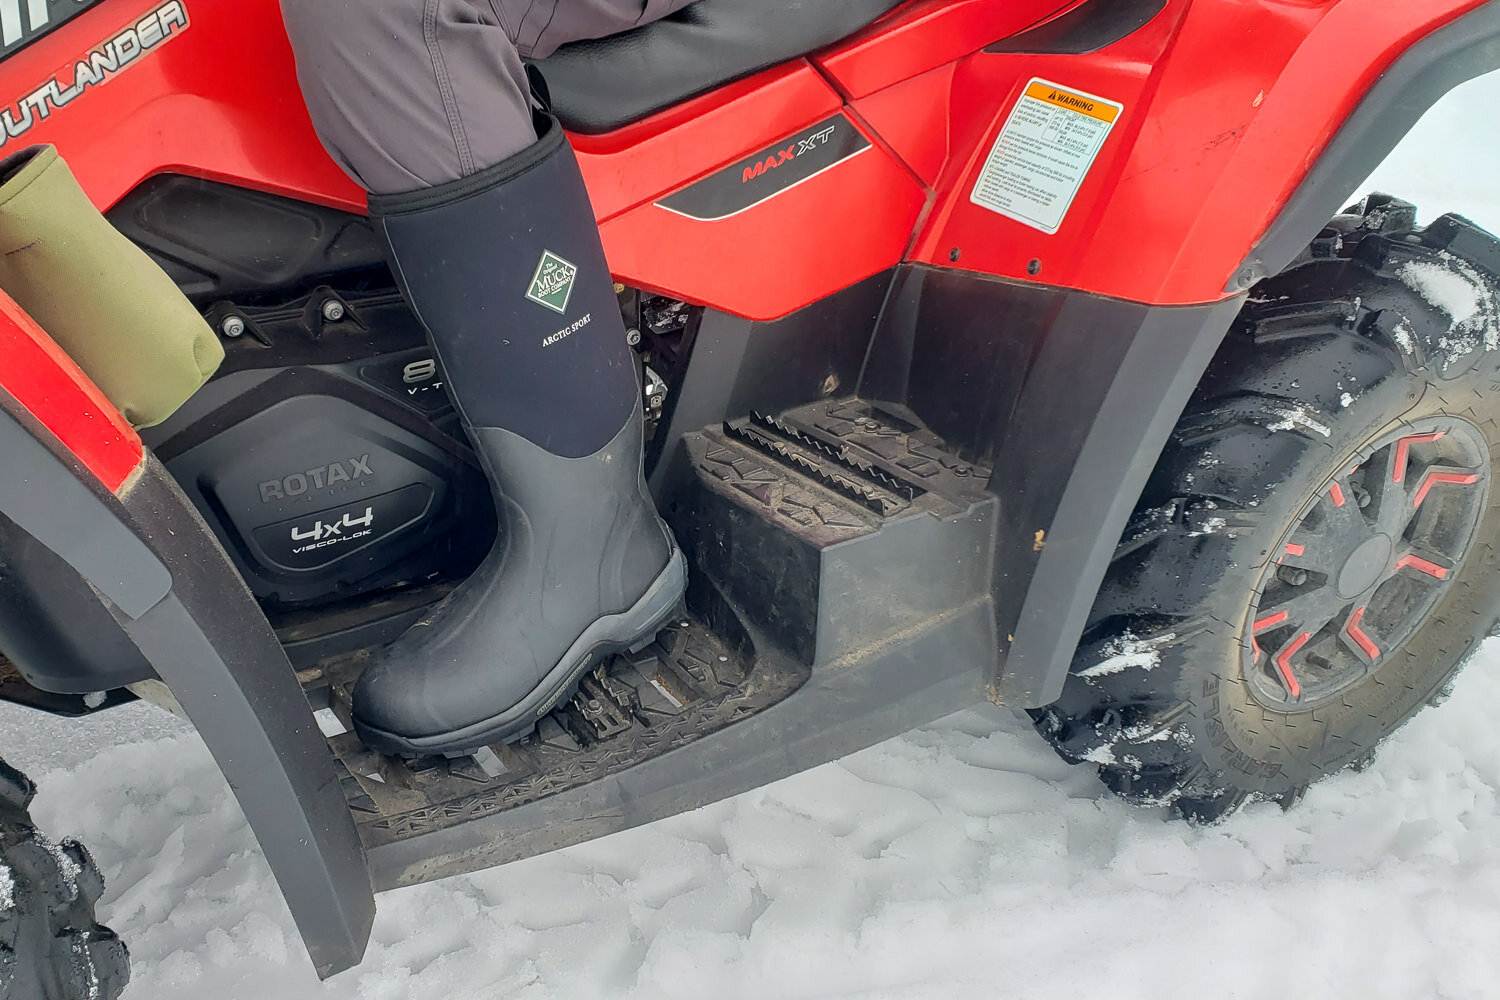 The Muck Boot Arctic Sport provide ultimate protection in wet, cold conditions.